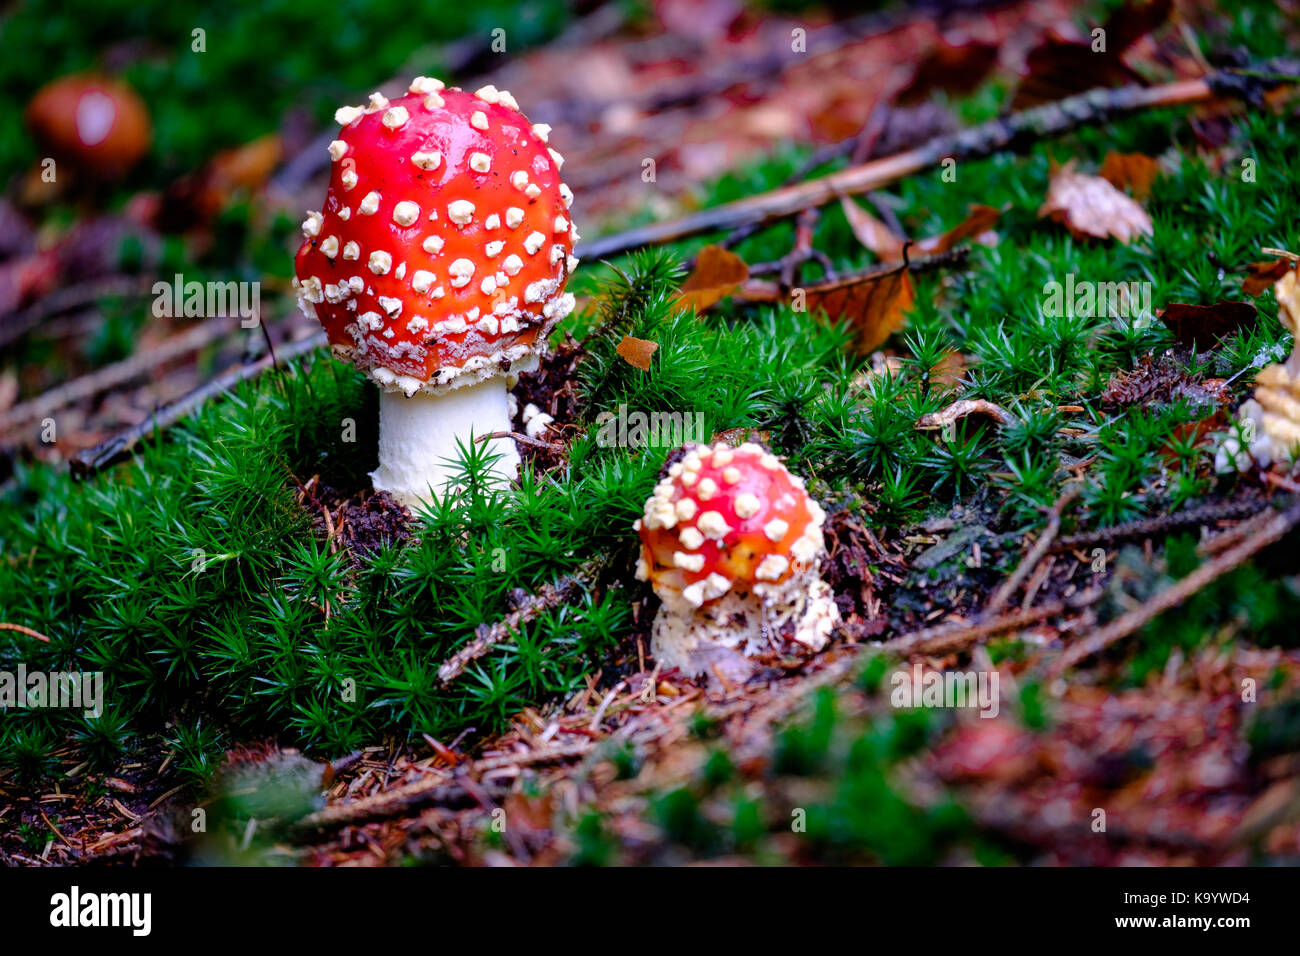 Amanita Muscaria, poisonous mushroom in the natural forest background Stock Photo